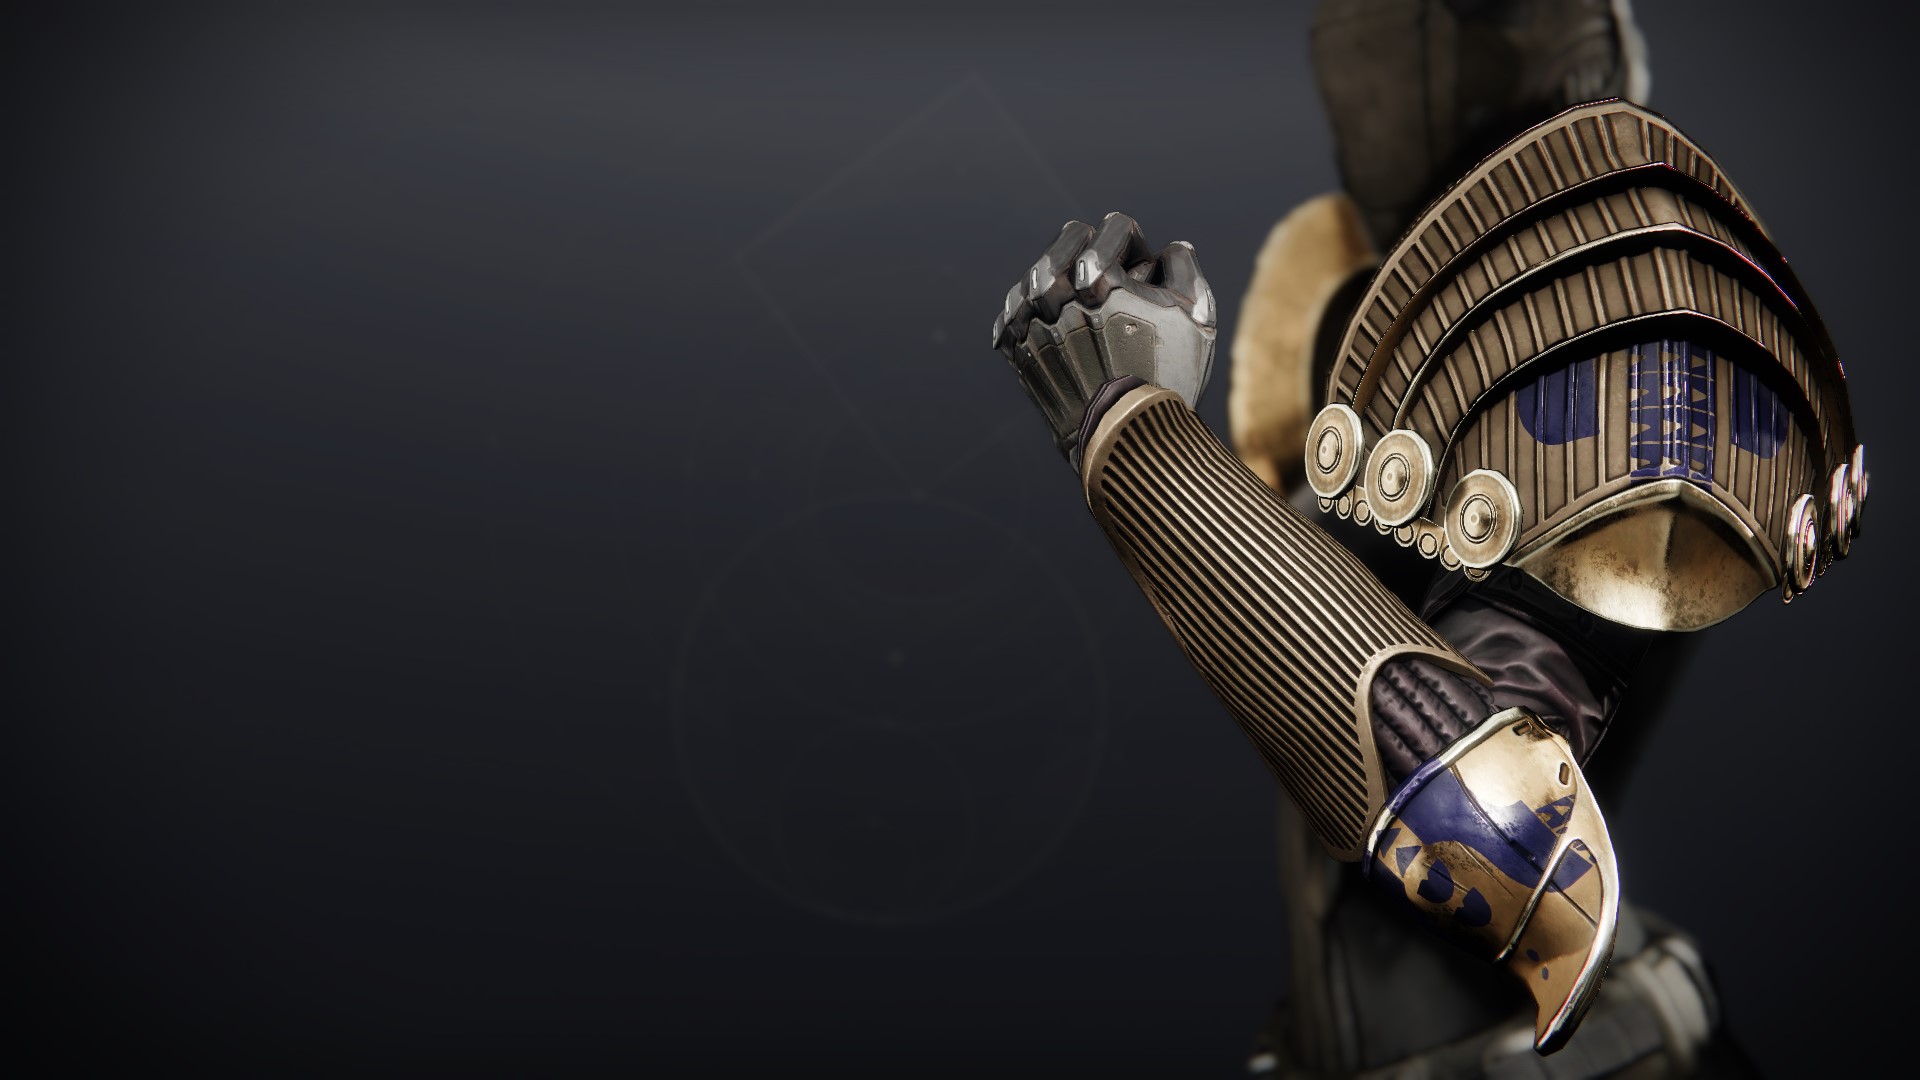 An in-game render of the Tusked Allegiance Gauntlets.